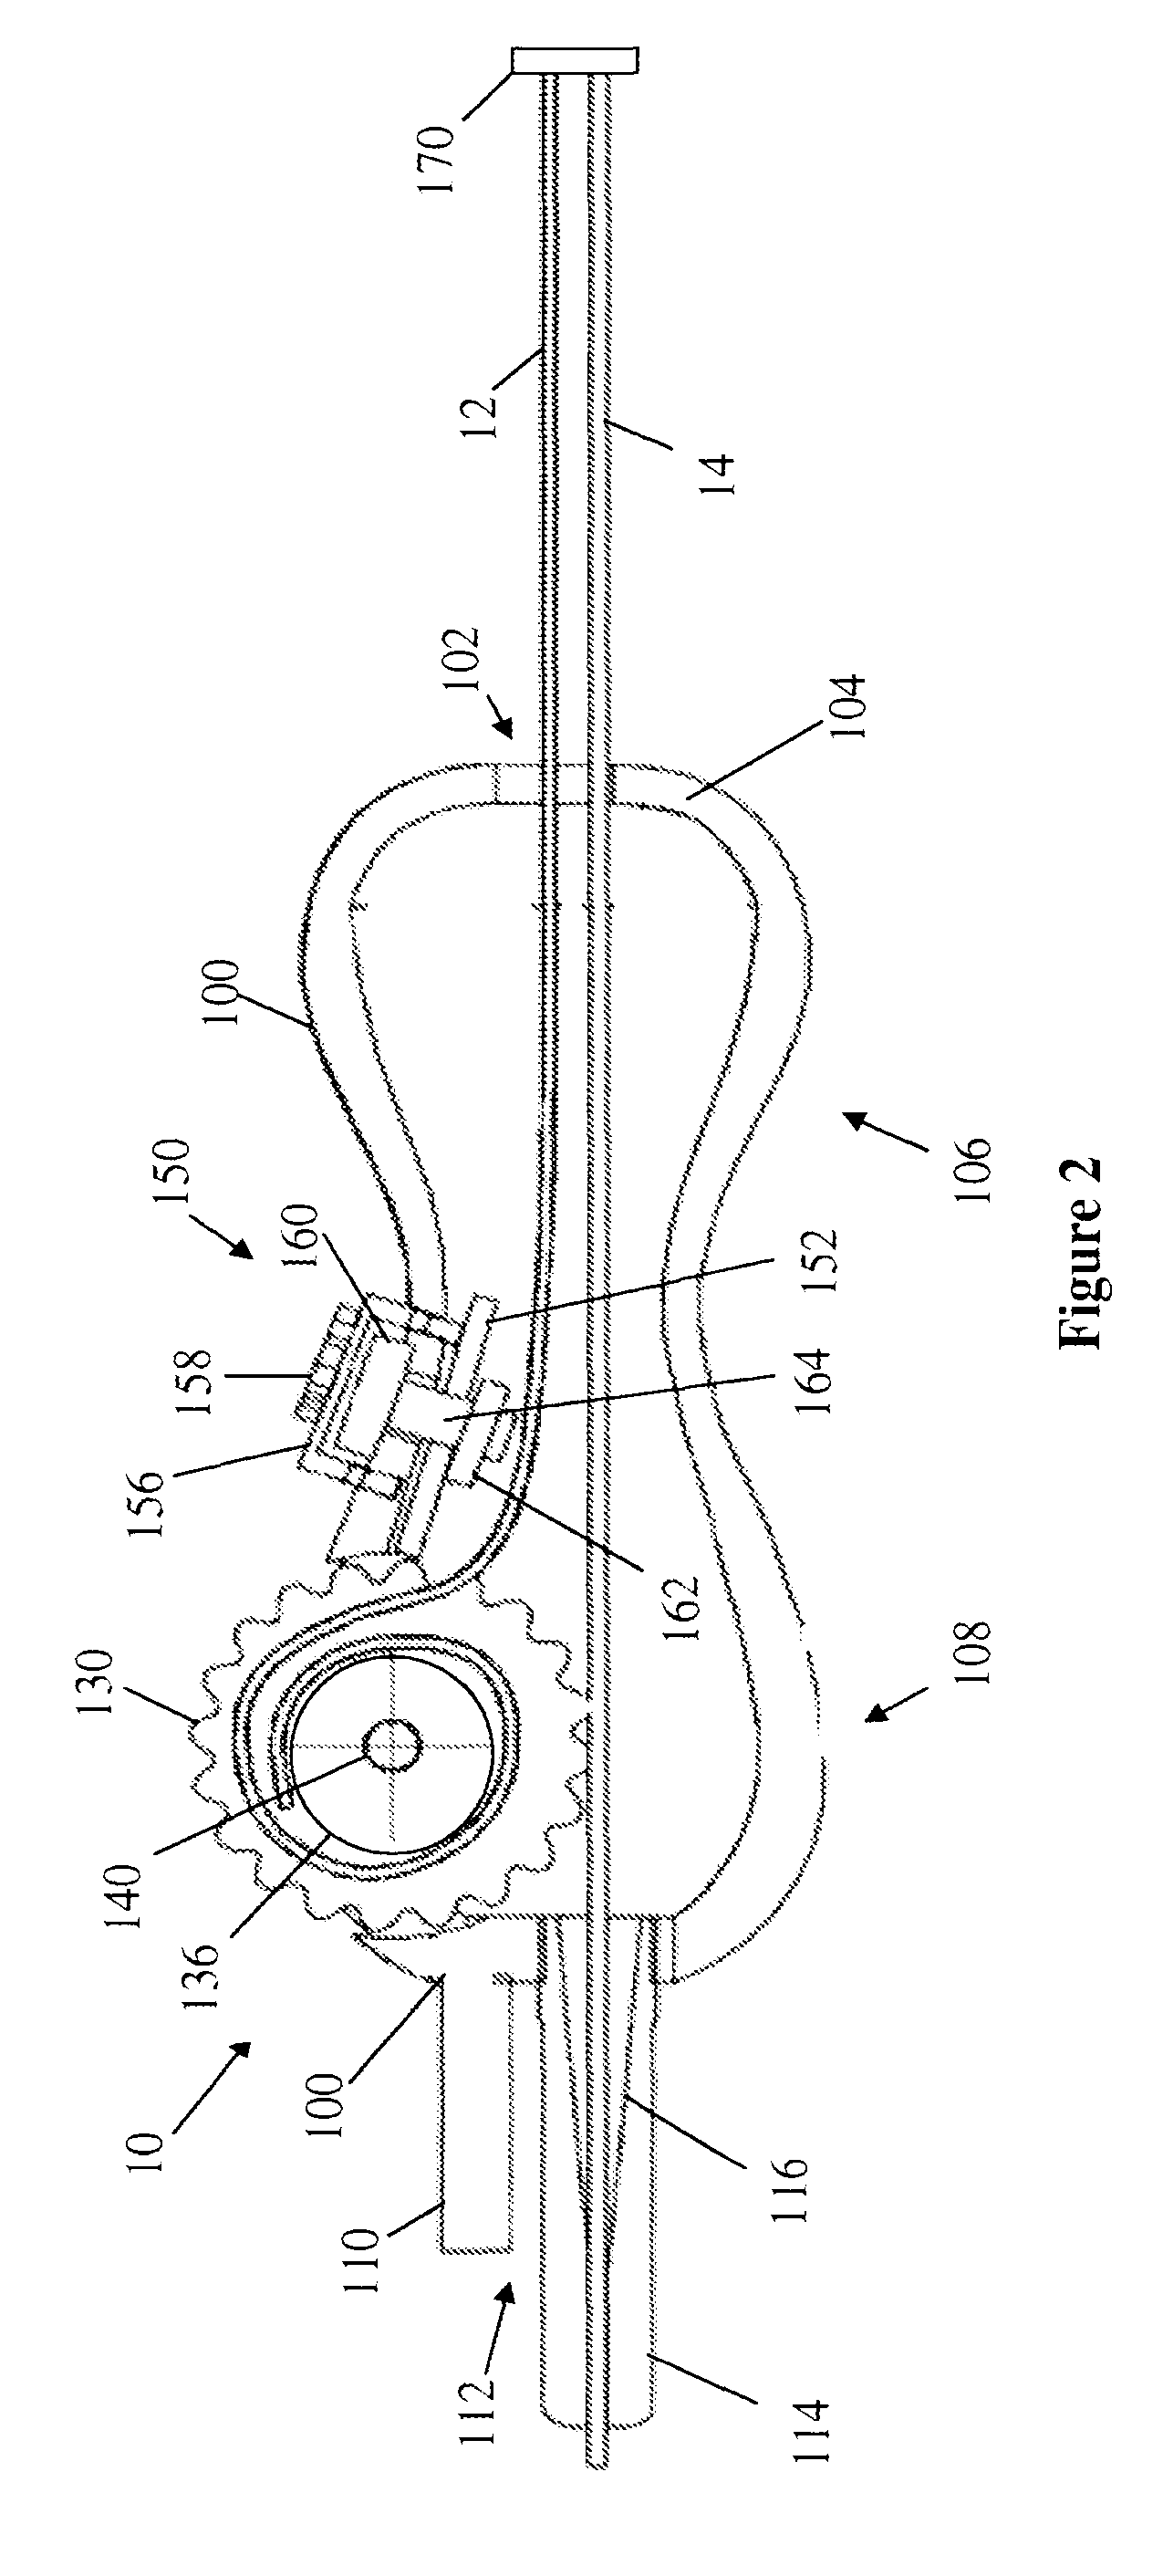 Ultrasound assisted catheter placement system